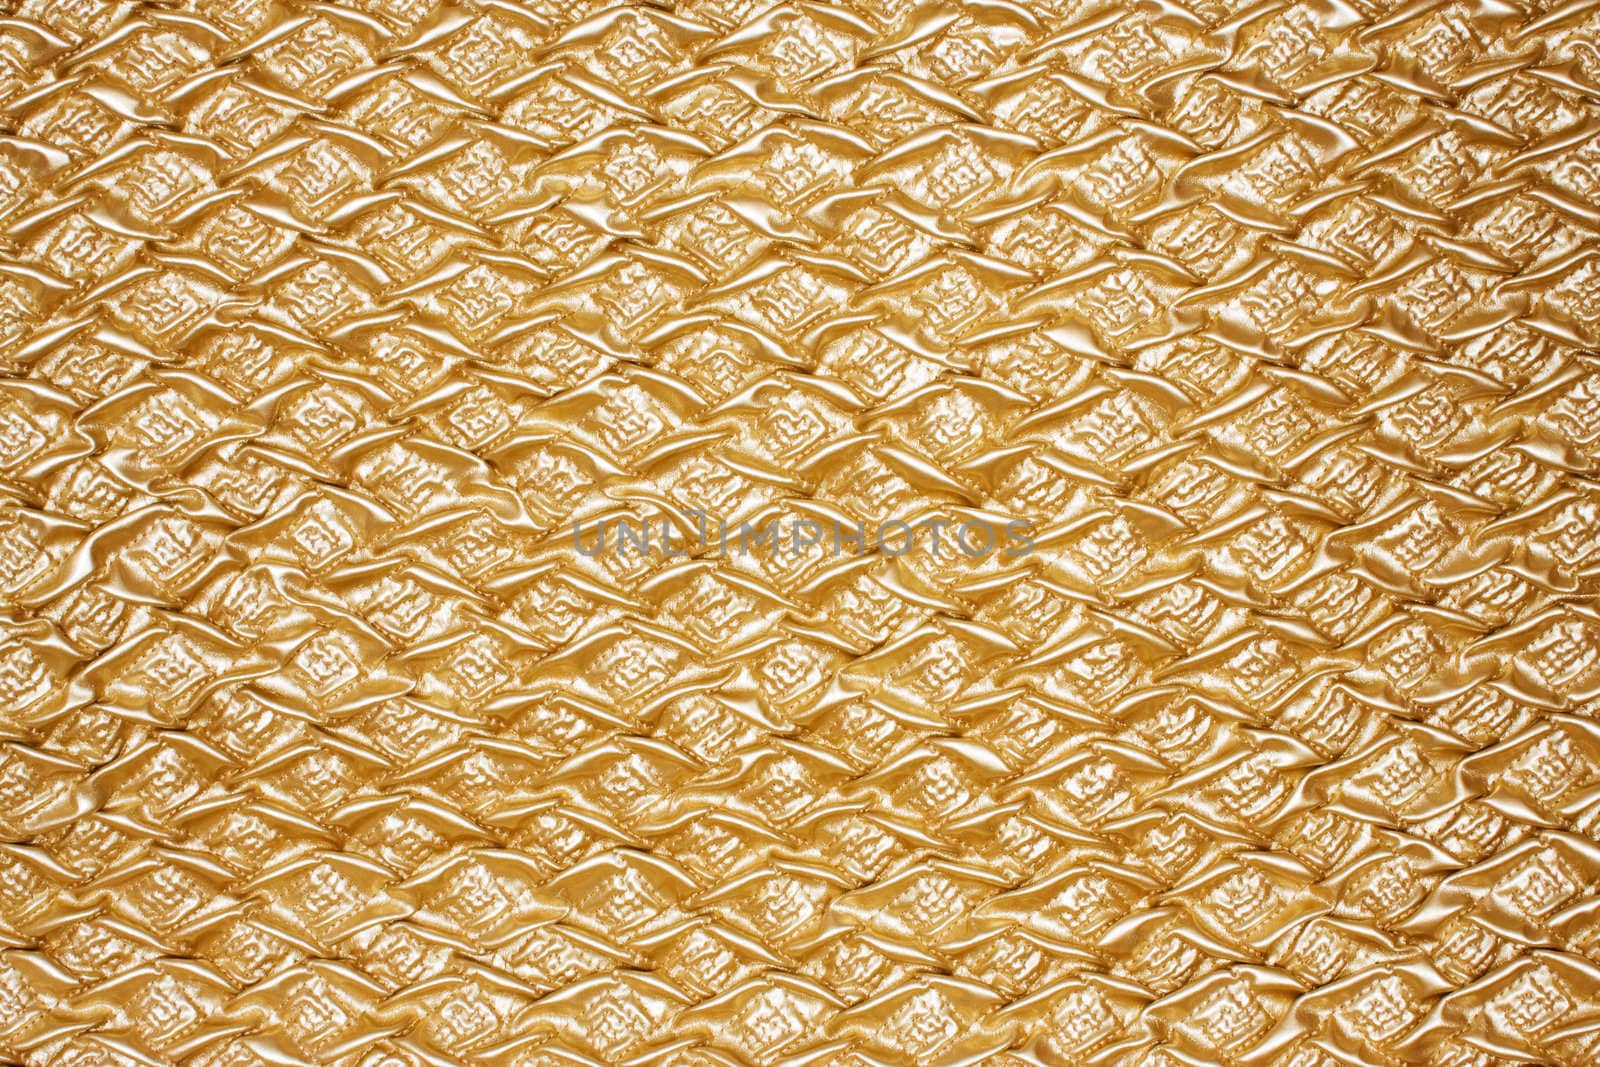 Golden close-up textured oilcloth or leather for background